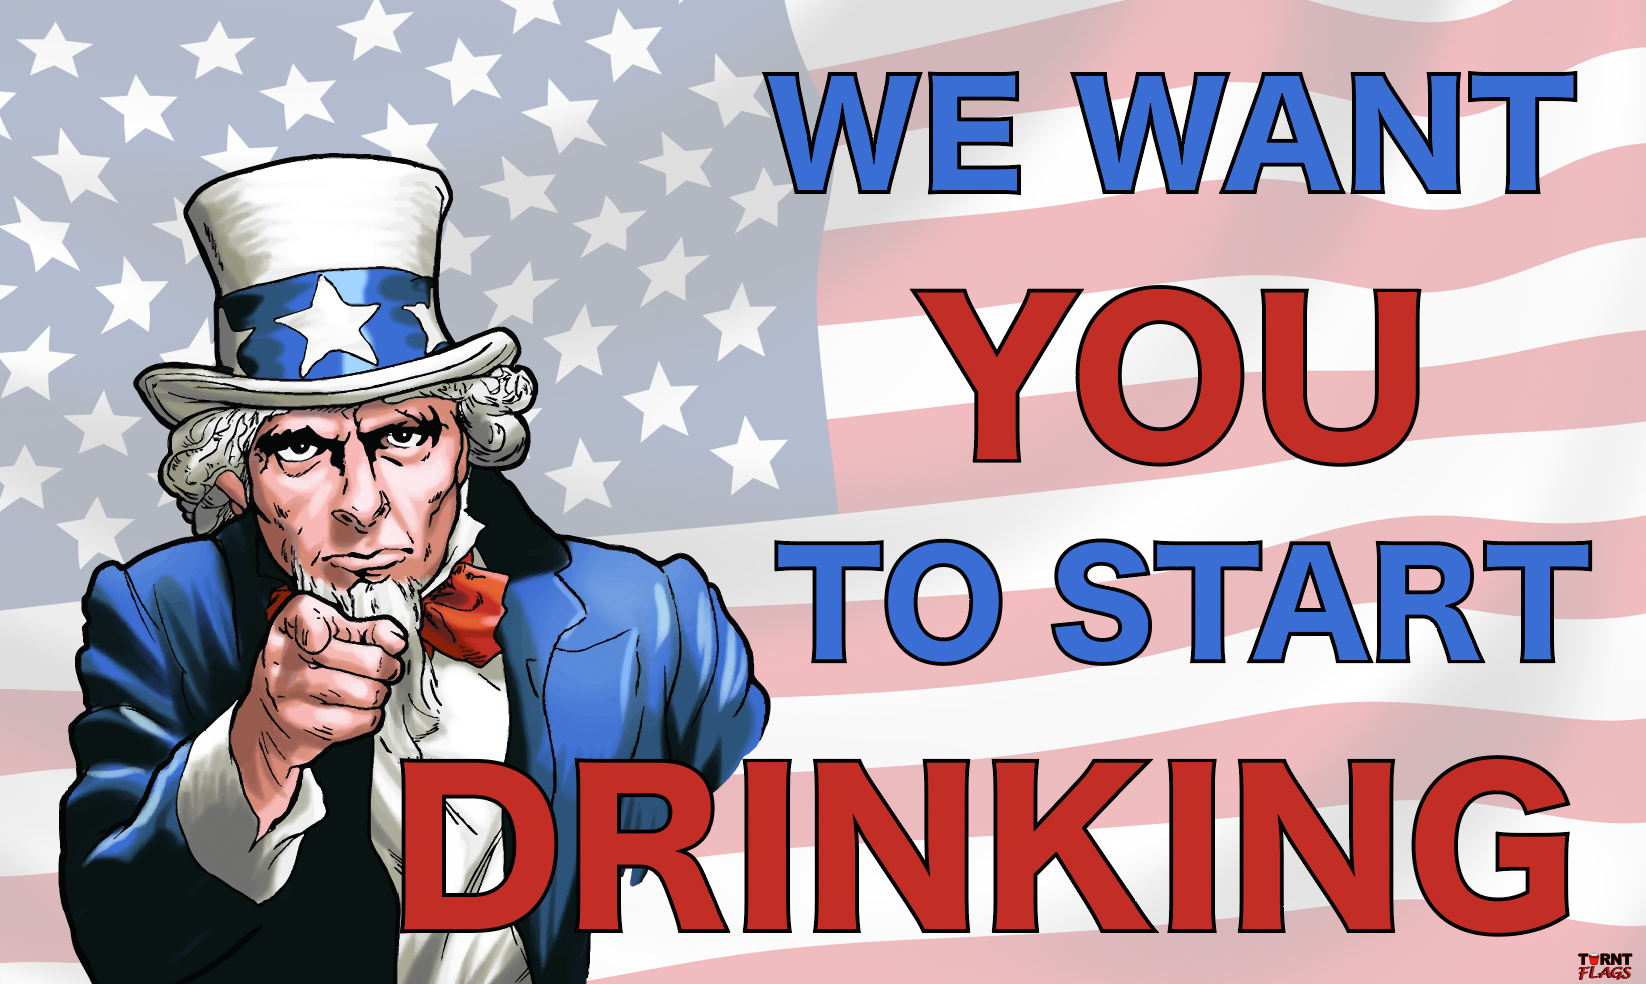 We want you to start drinking